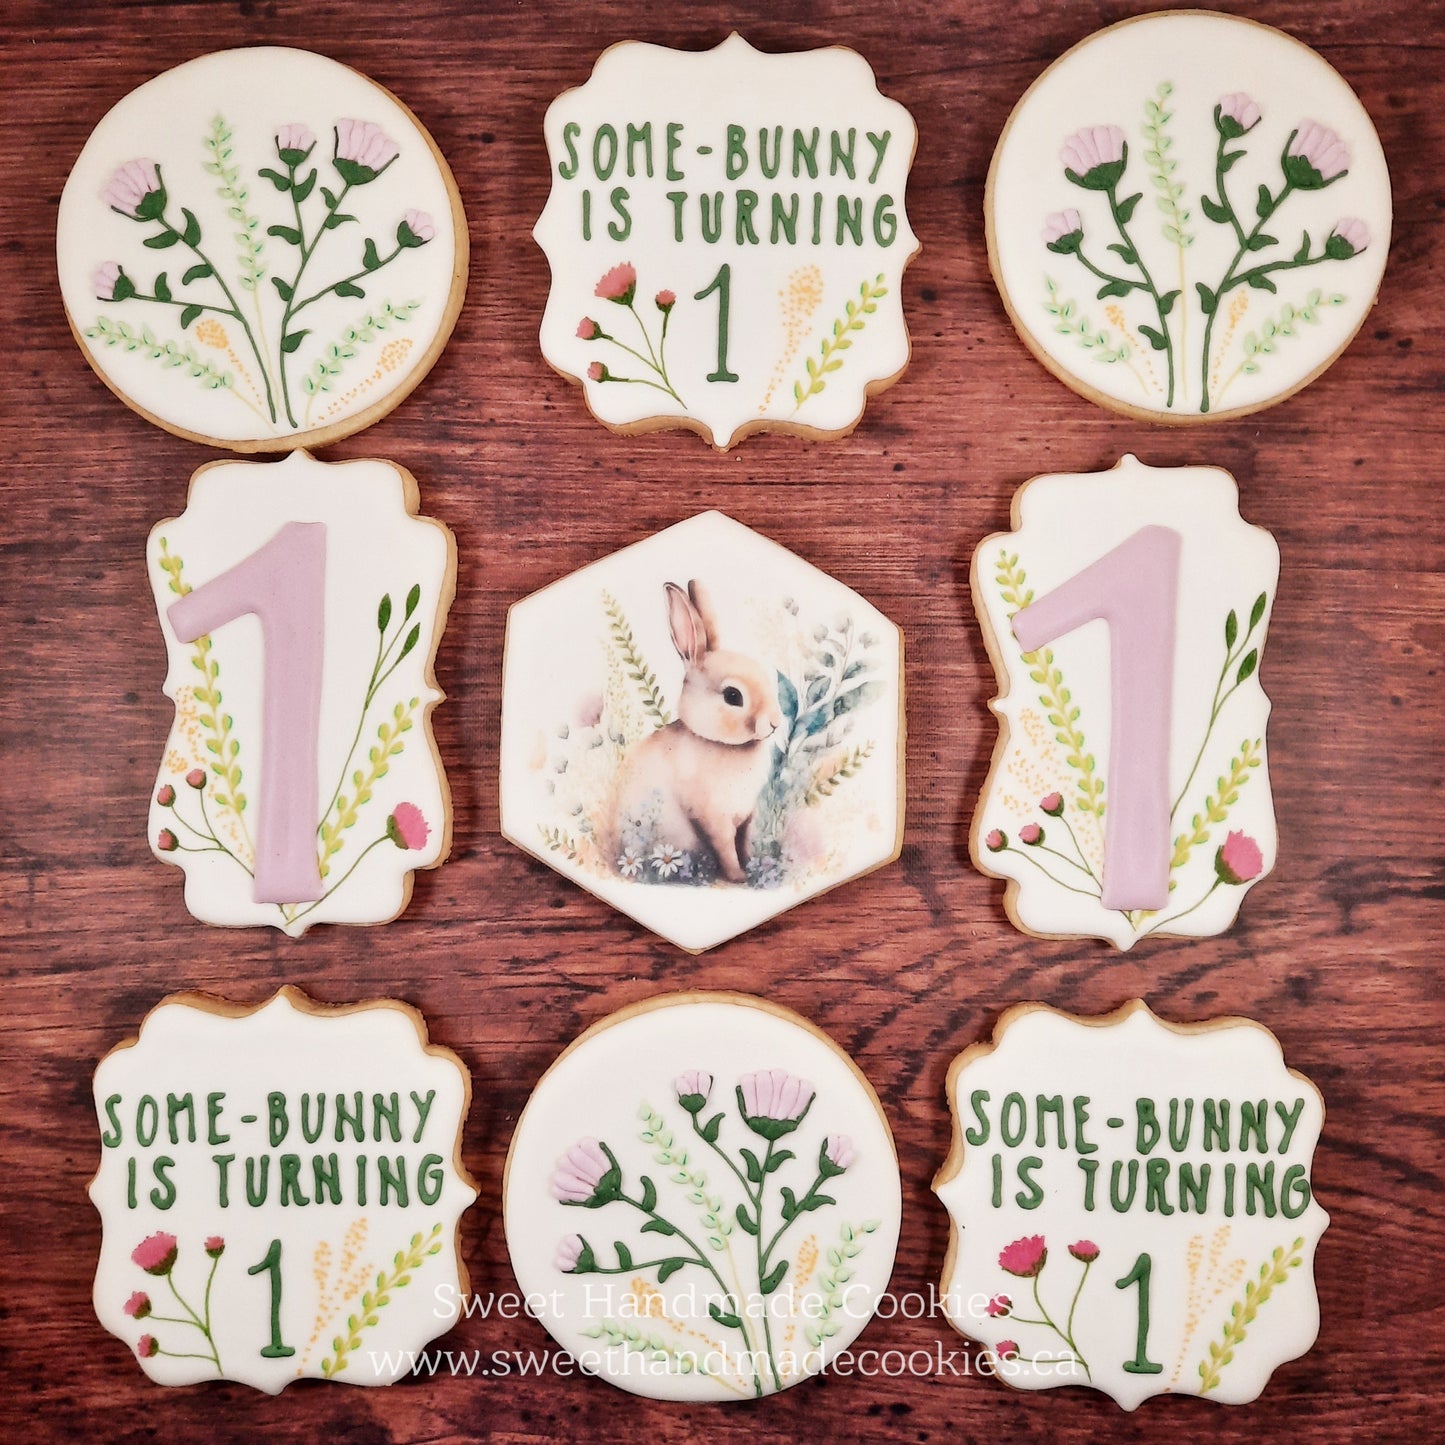 Somebunny is Turning 1 Cookies